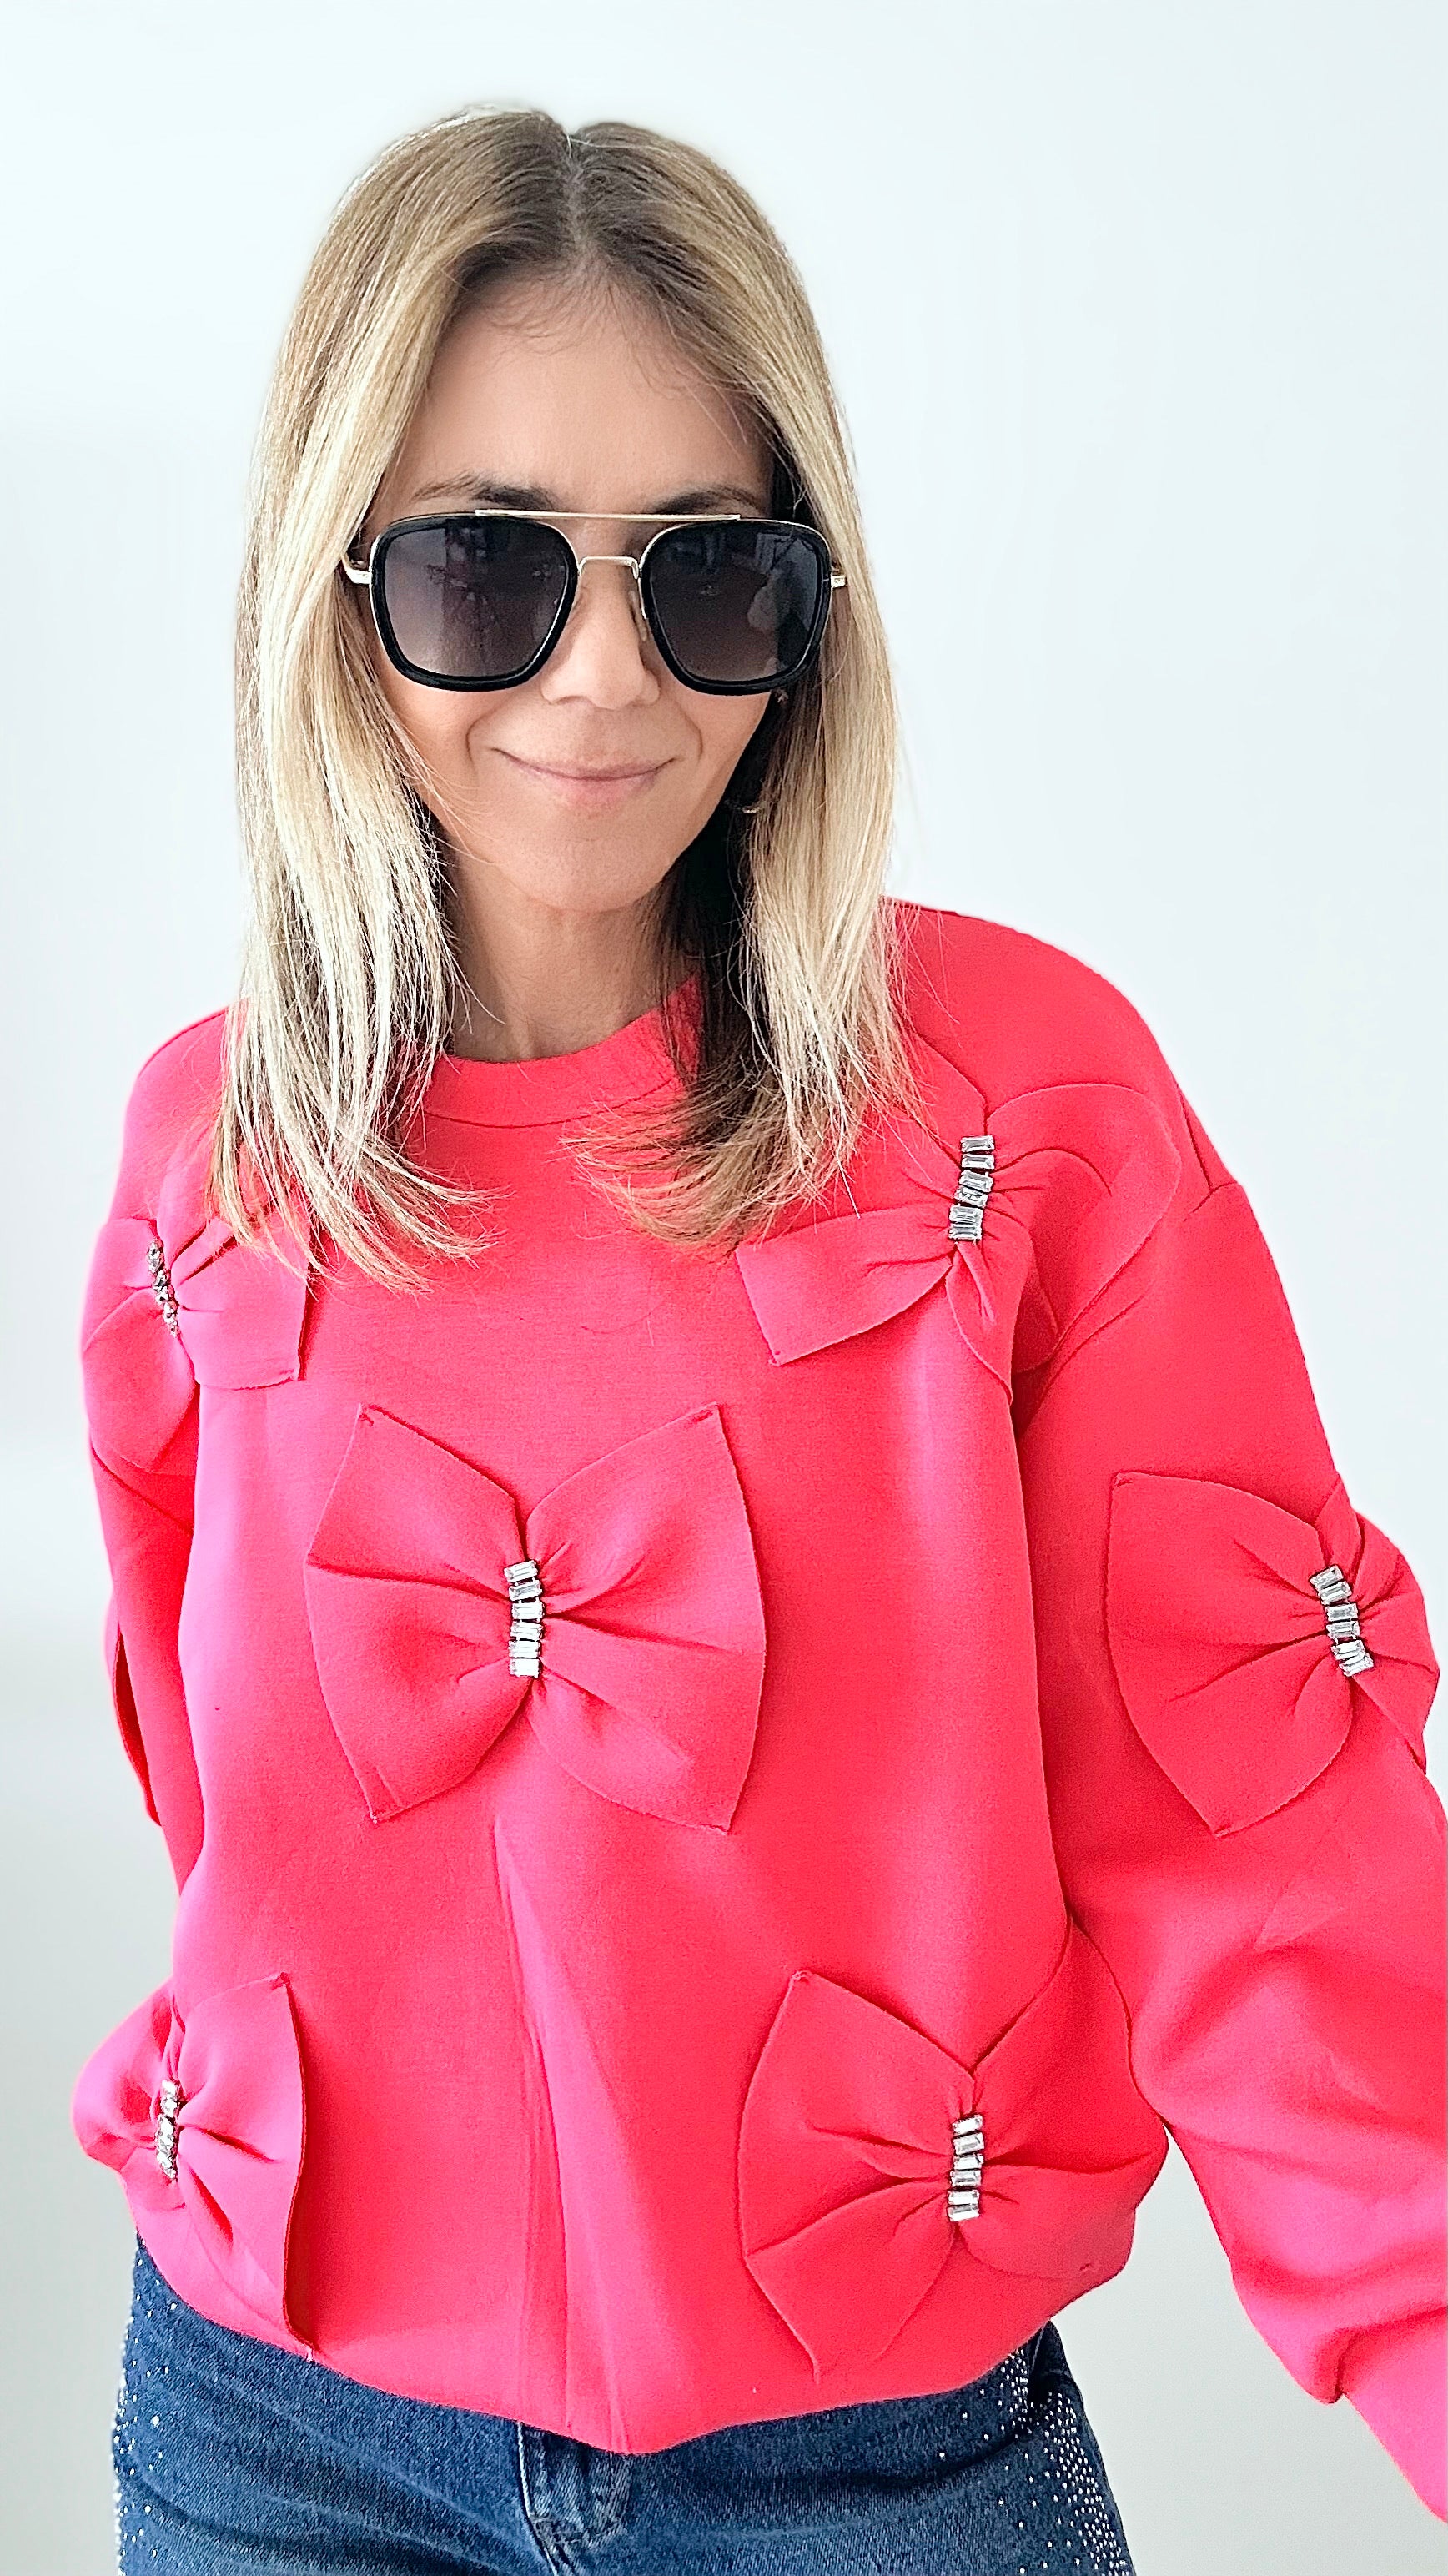 Fiora French Scuba Ribbon-Bow Sweatshirt - Hot Pink-130 Long Sleeve Tops-Joh Apparel-Coastal Bloom Boutique, find the trendiest versions of the popular styles and looks Located in Indialantic, FL